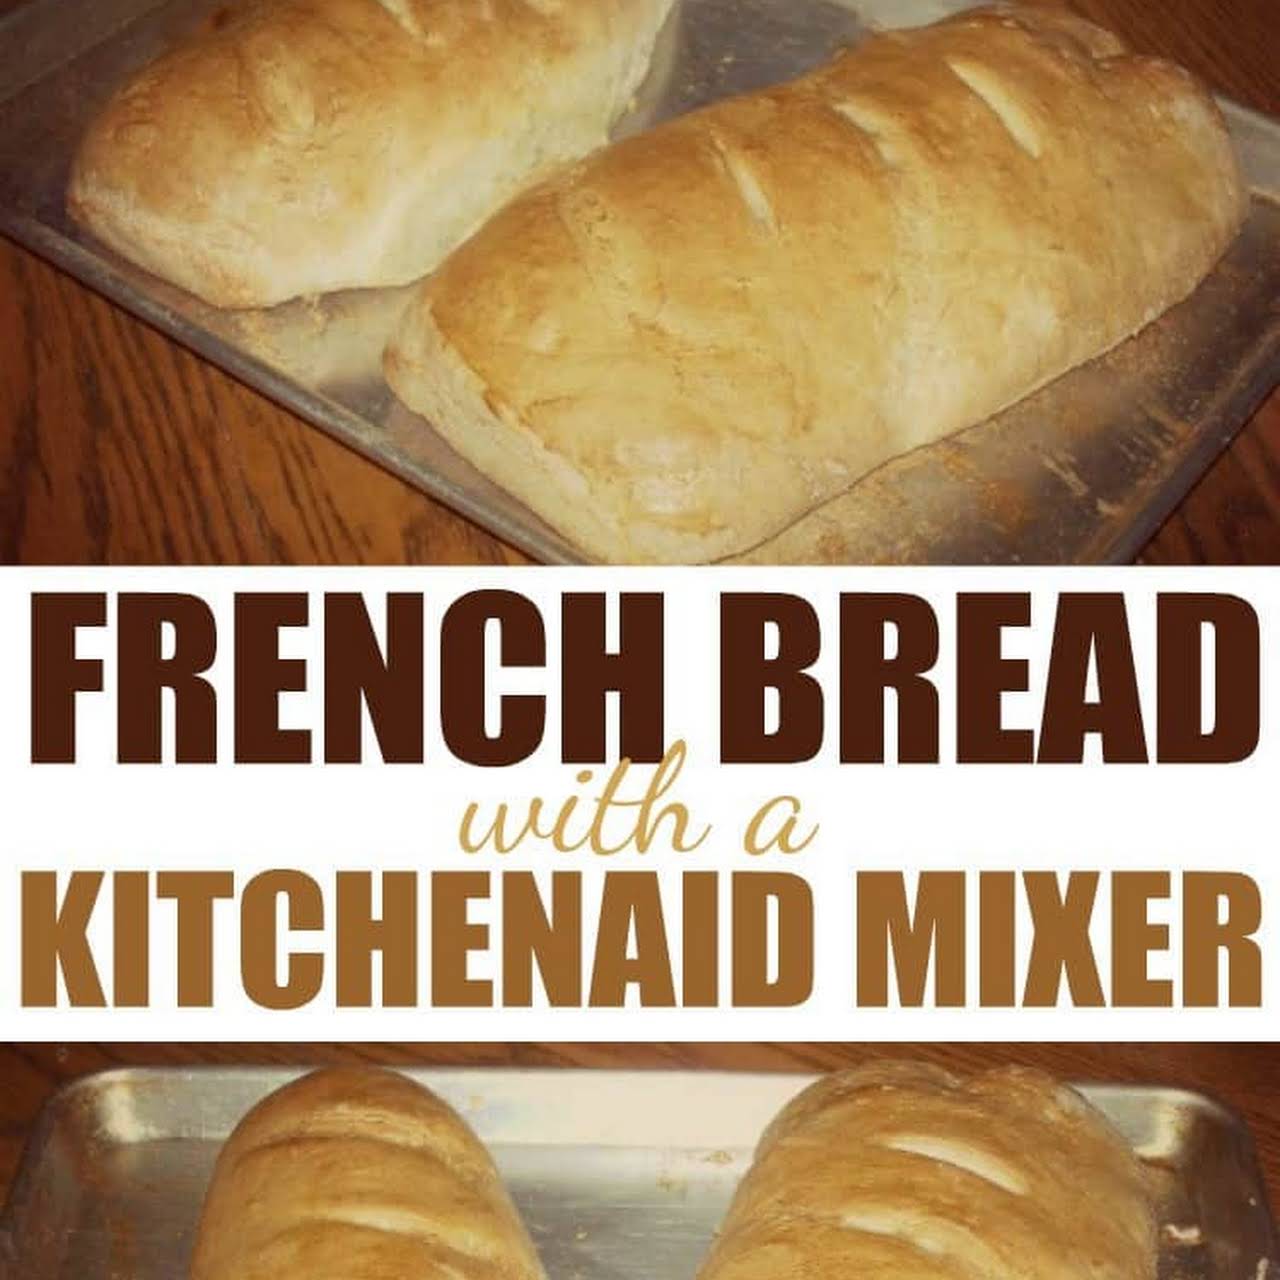 French Bread with a KitchenAid Mixer